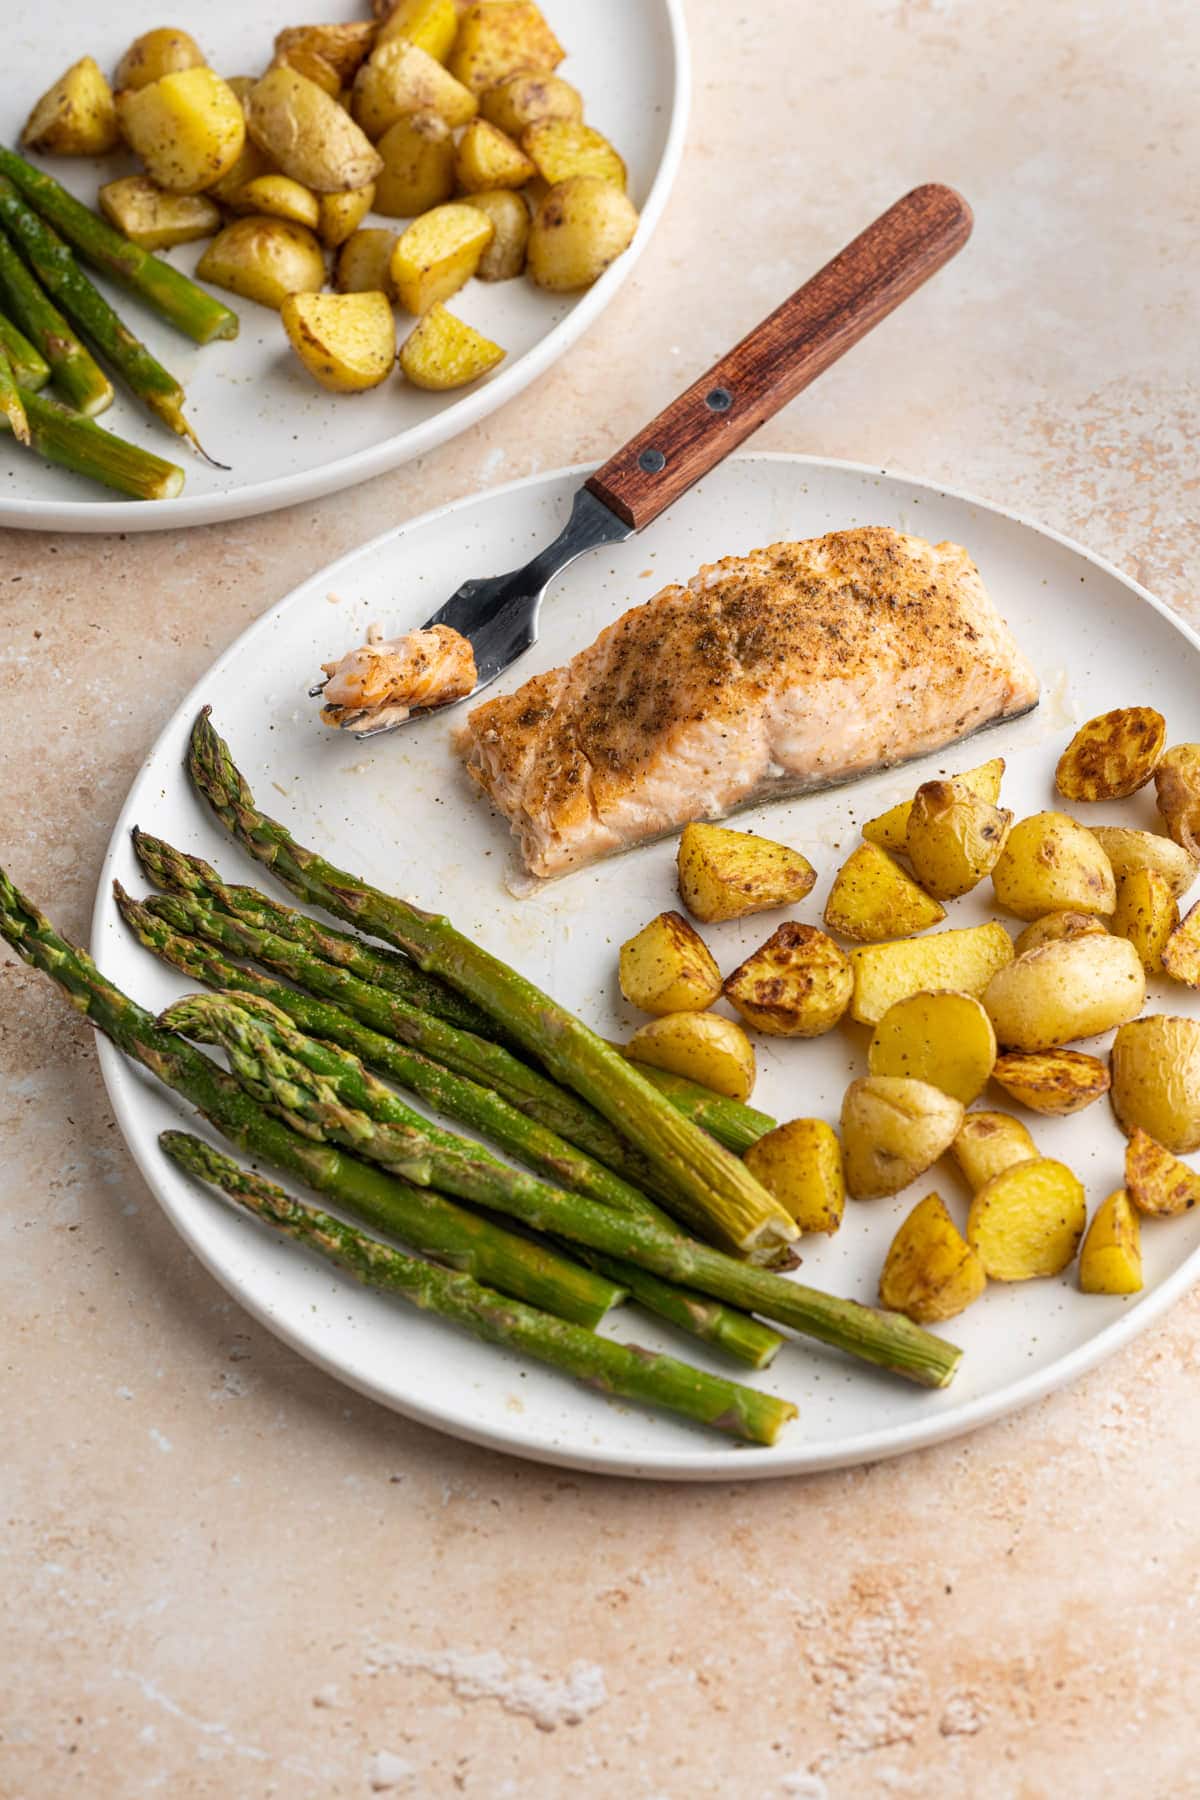 Salmon with forkful cut out on plate with asparagus and potatoes